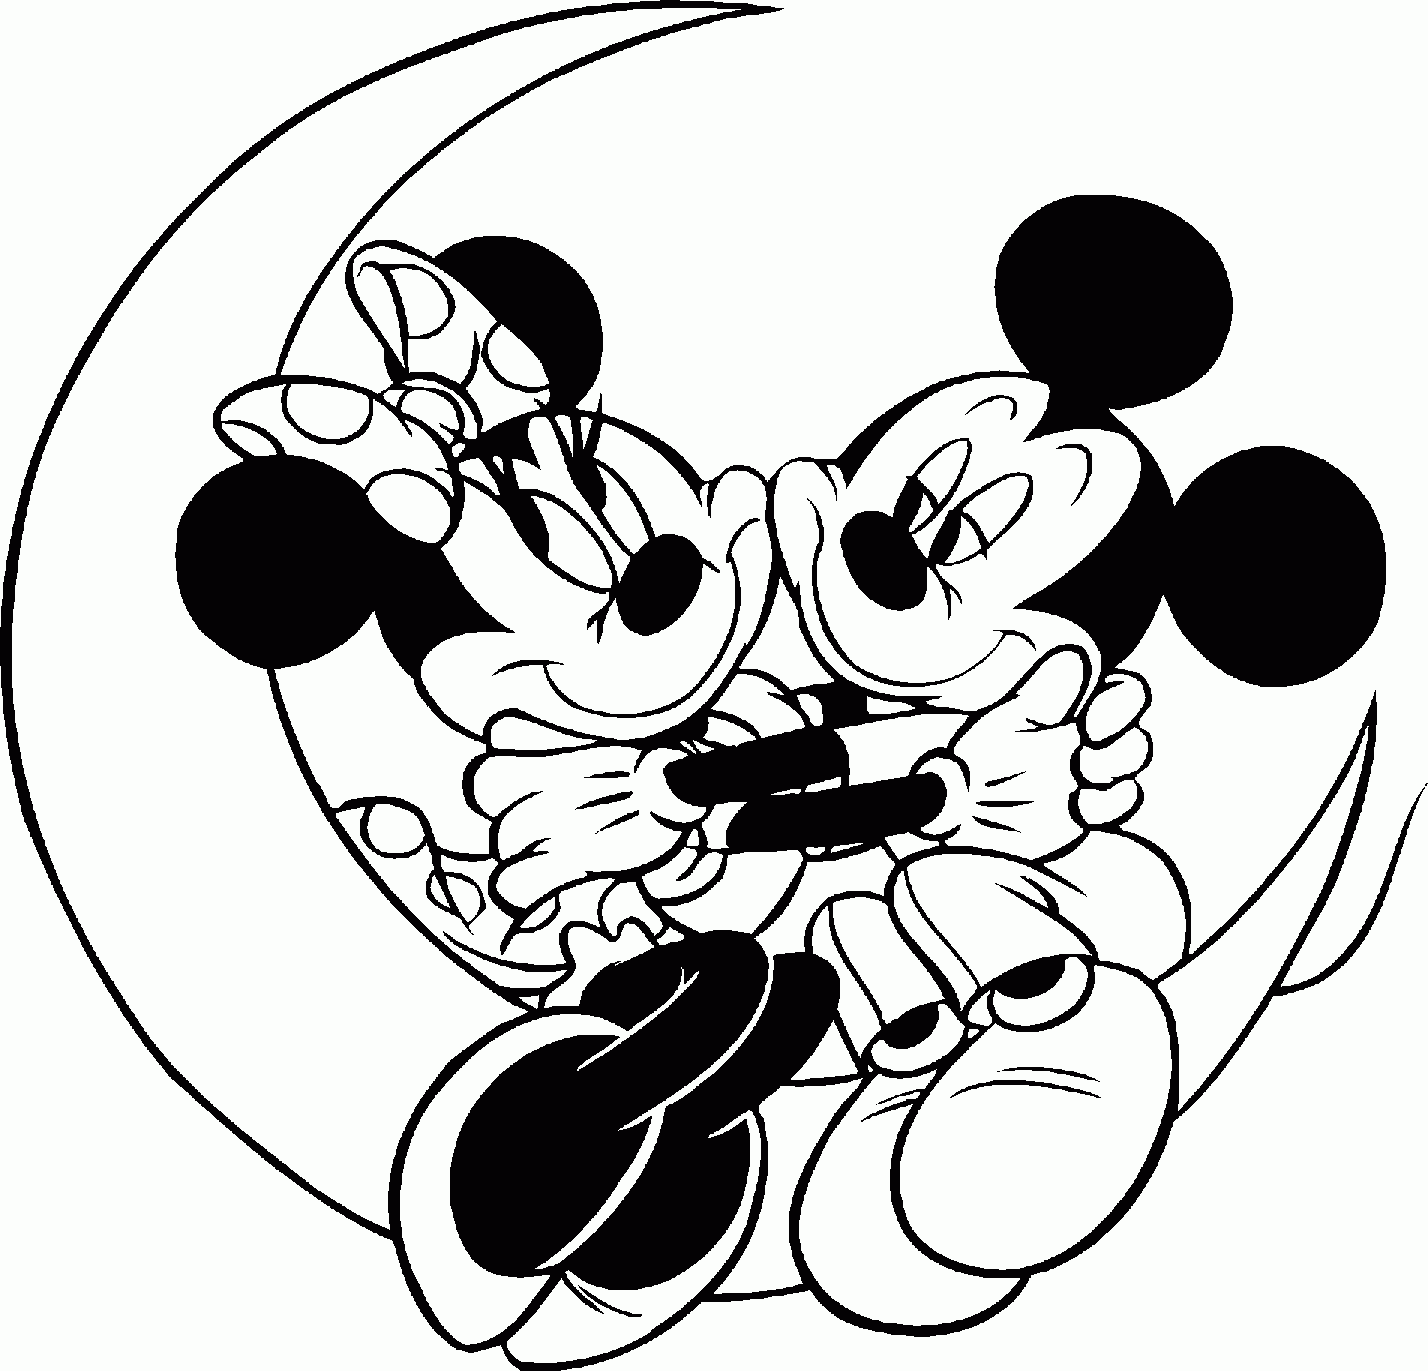 Mickey and Minnie Coloring Pages and Book | UniqueColoringPages